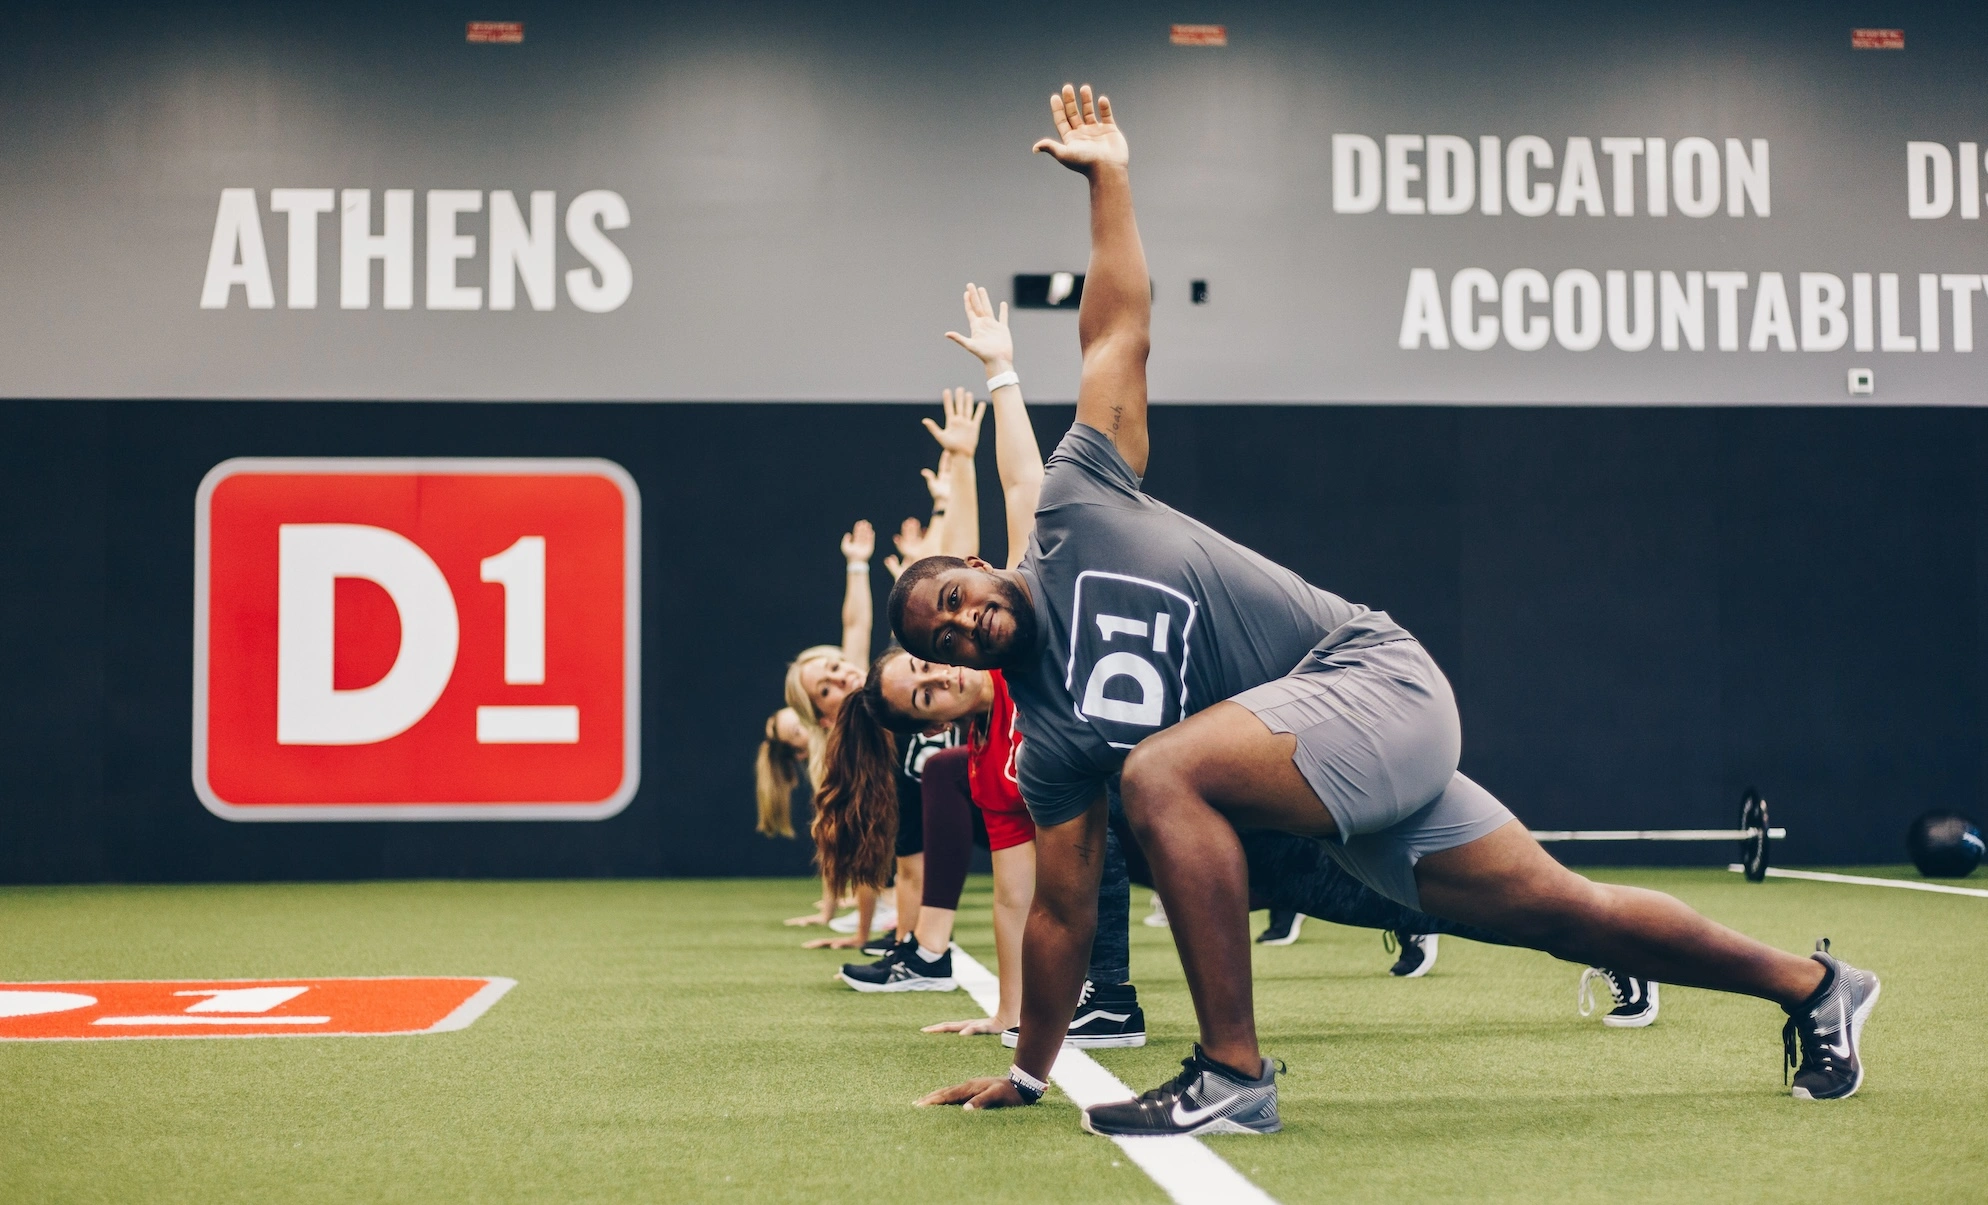 D1 Training Continues Franchise Growth Amid Demand for Athletic Fitness